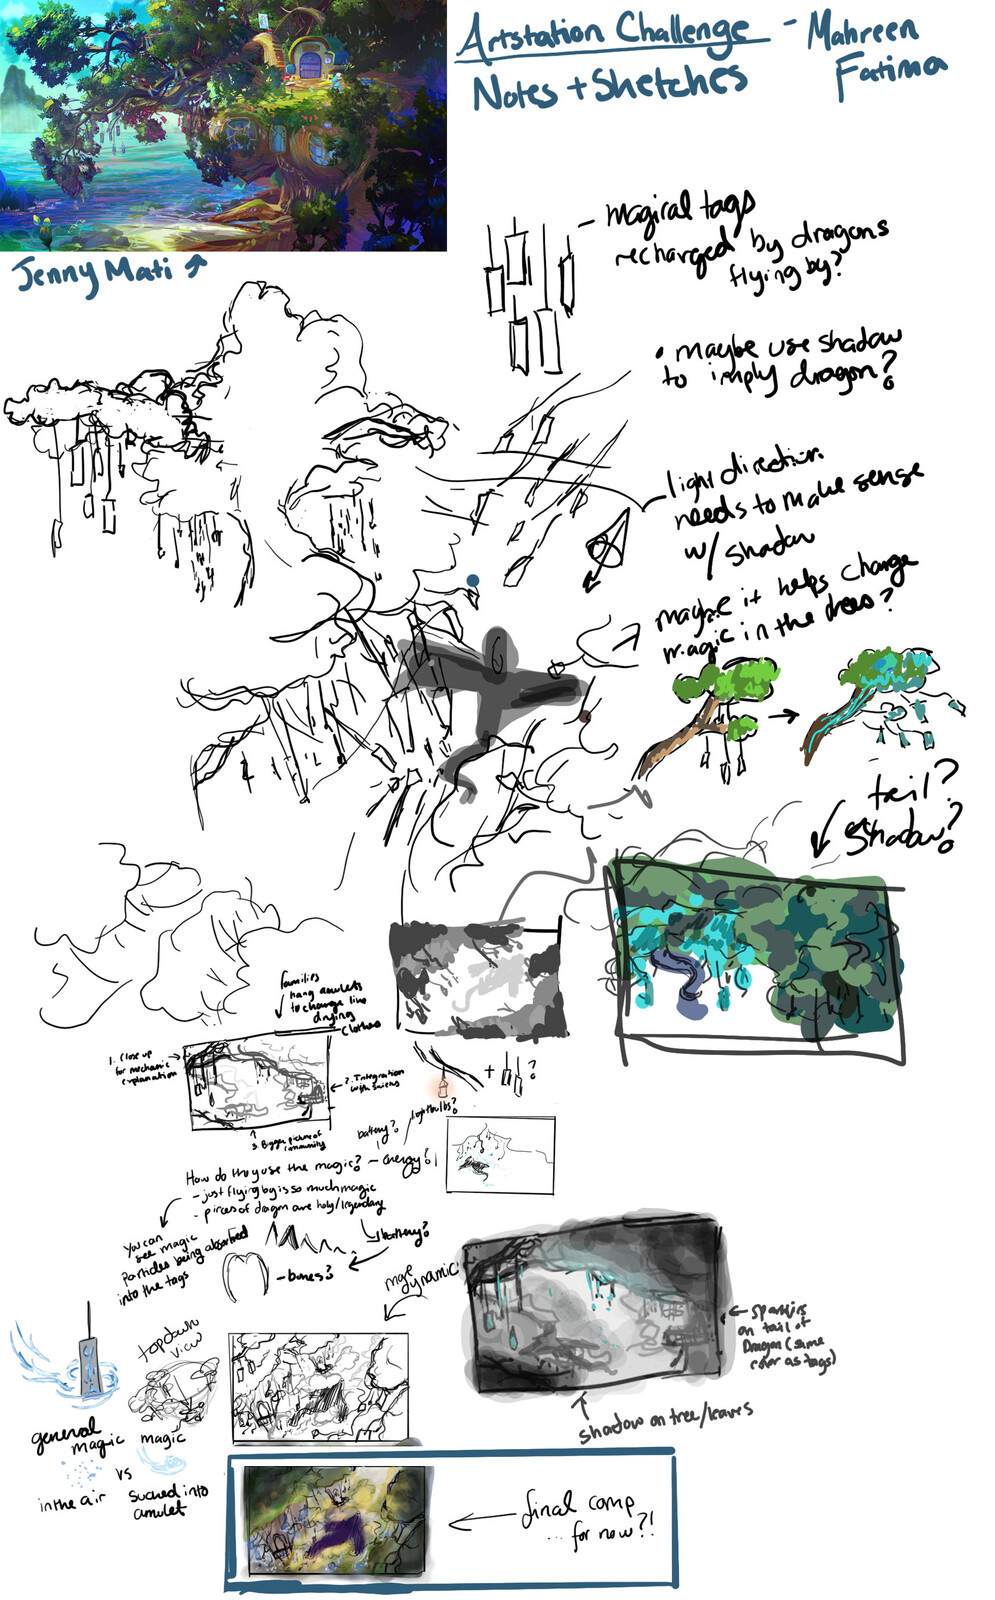 Jenny Mati's submission originally inspired me and I decided to build off of that and add some of my own twists. Here are my sketches/notes from the beginning of the challenge. 